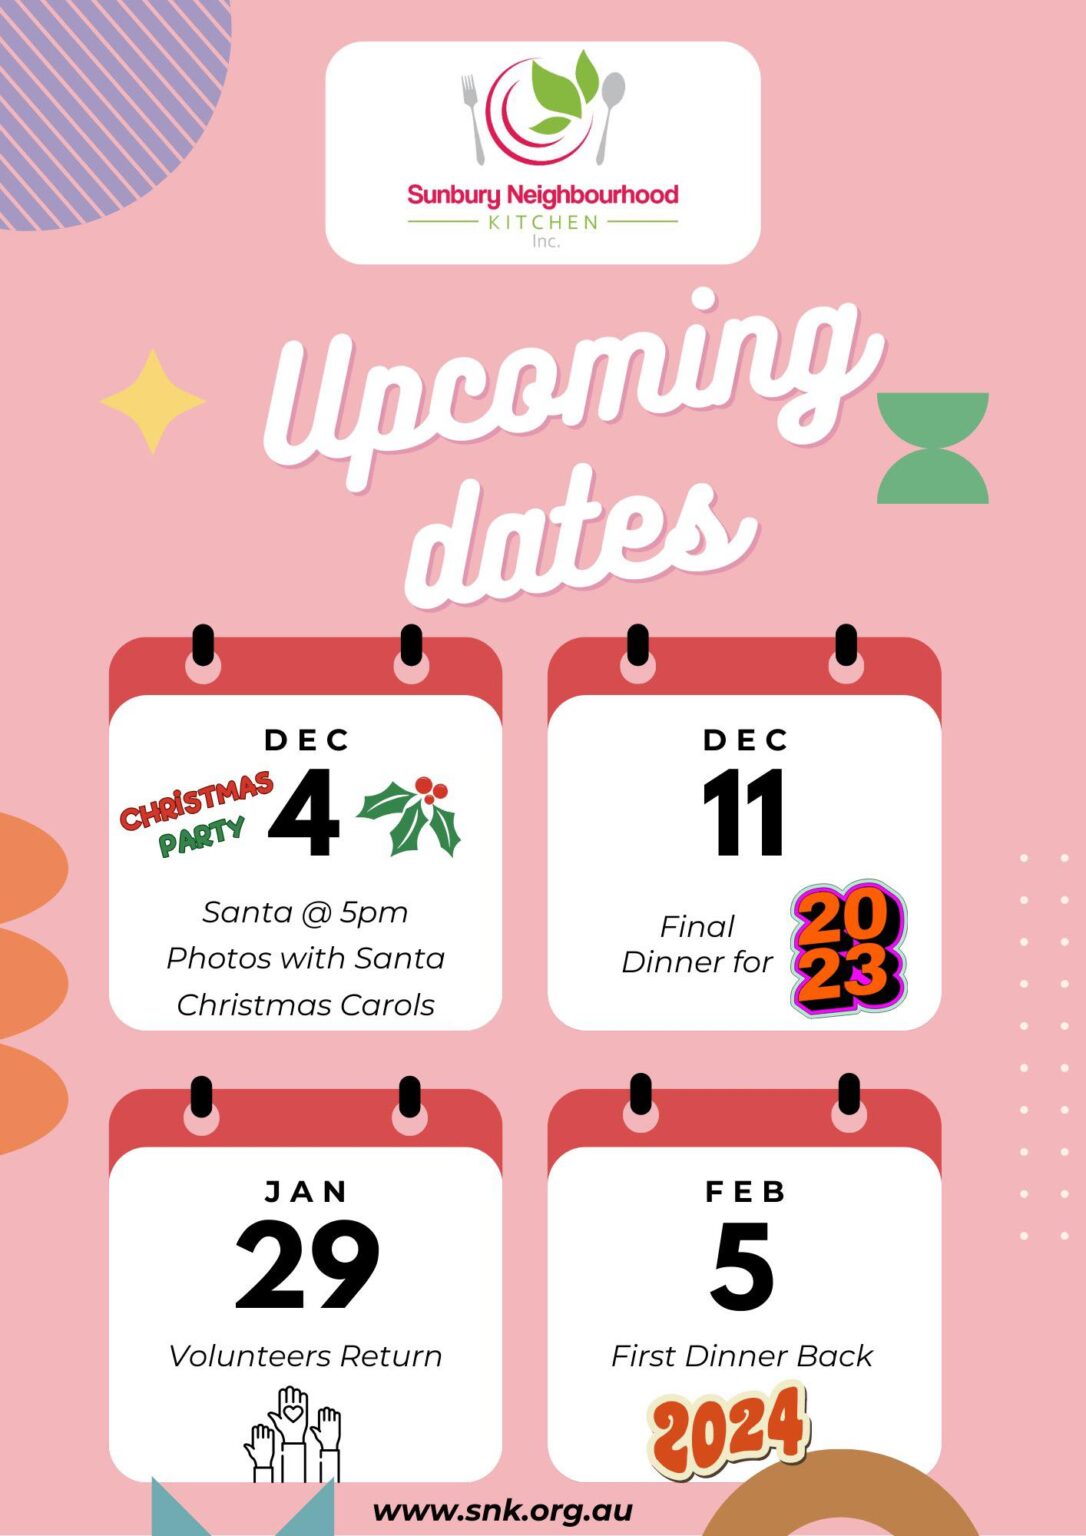 Upcoming dates at Sunbury Neighbourhood Kitchen 4 December Santa will arrive at 5pm and be available for photos. We will have our Christmas dinner. 11 December will be our last meal for 2023. Sunbury Neighbourhood Kitchen will reopen on 5 February 2024.